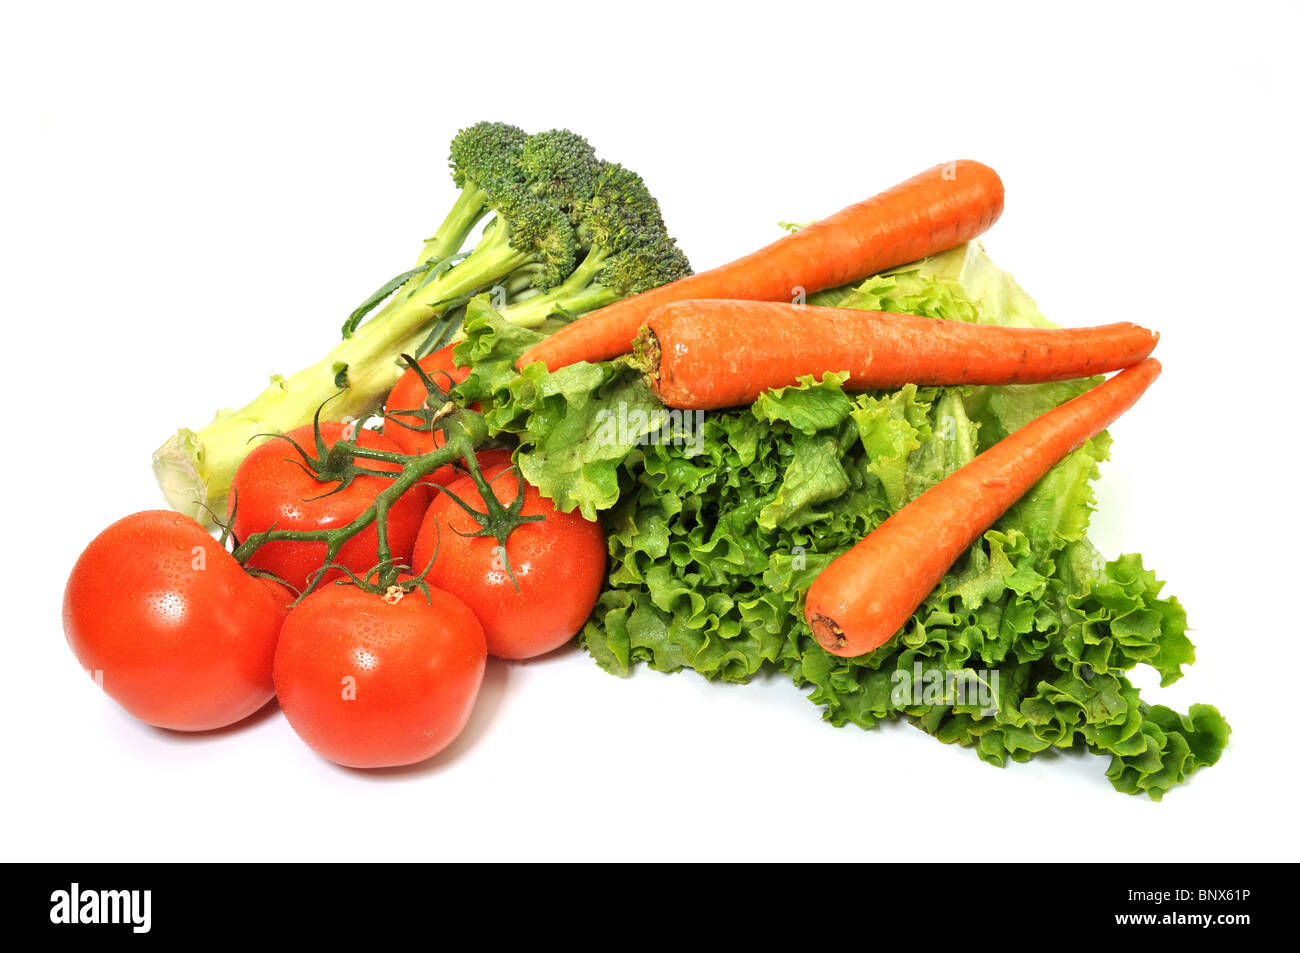 Green leafy lettuce, broccoli, carrots, and tomatoes isolated on white ...